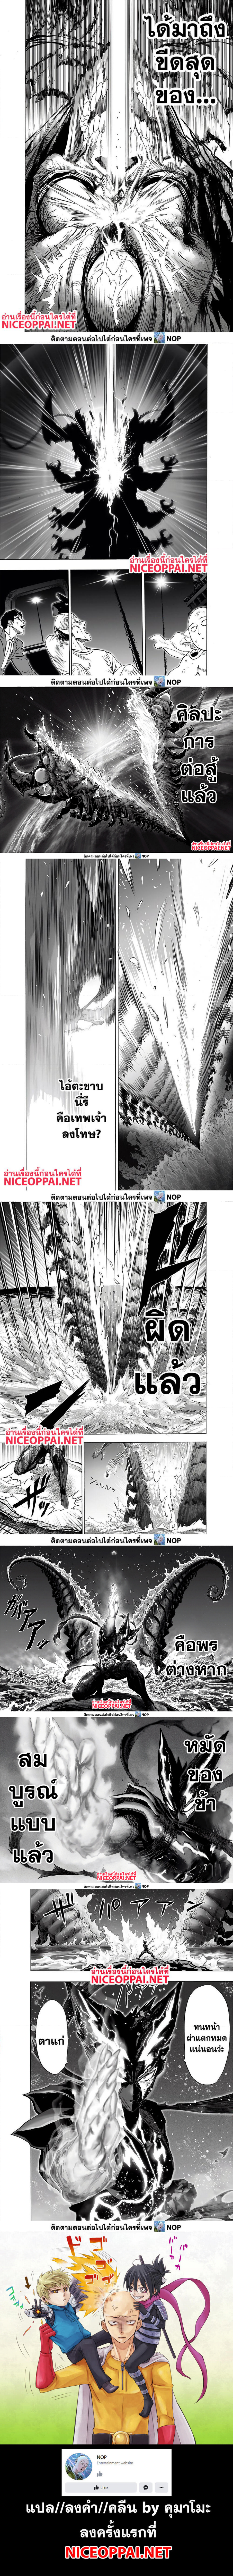 One Punch Man 159 (3)